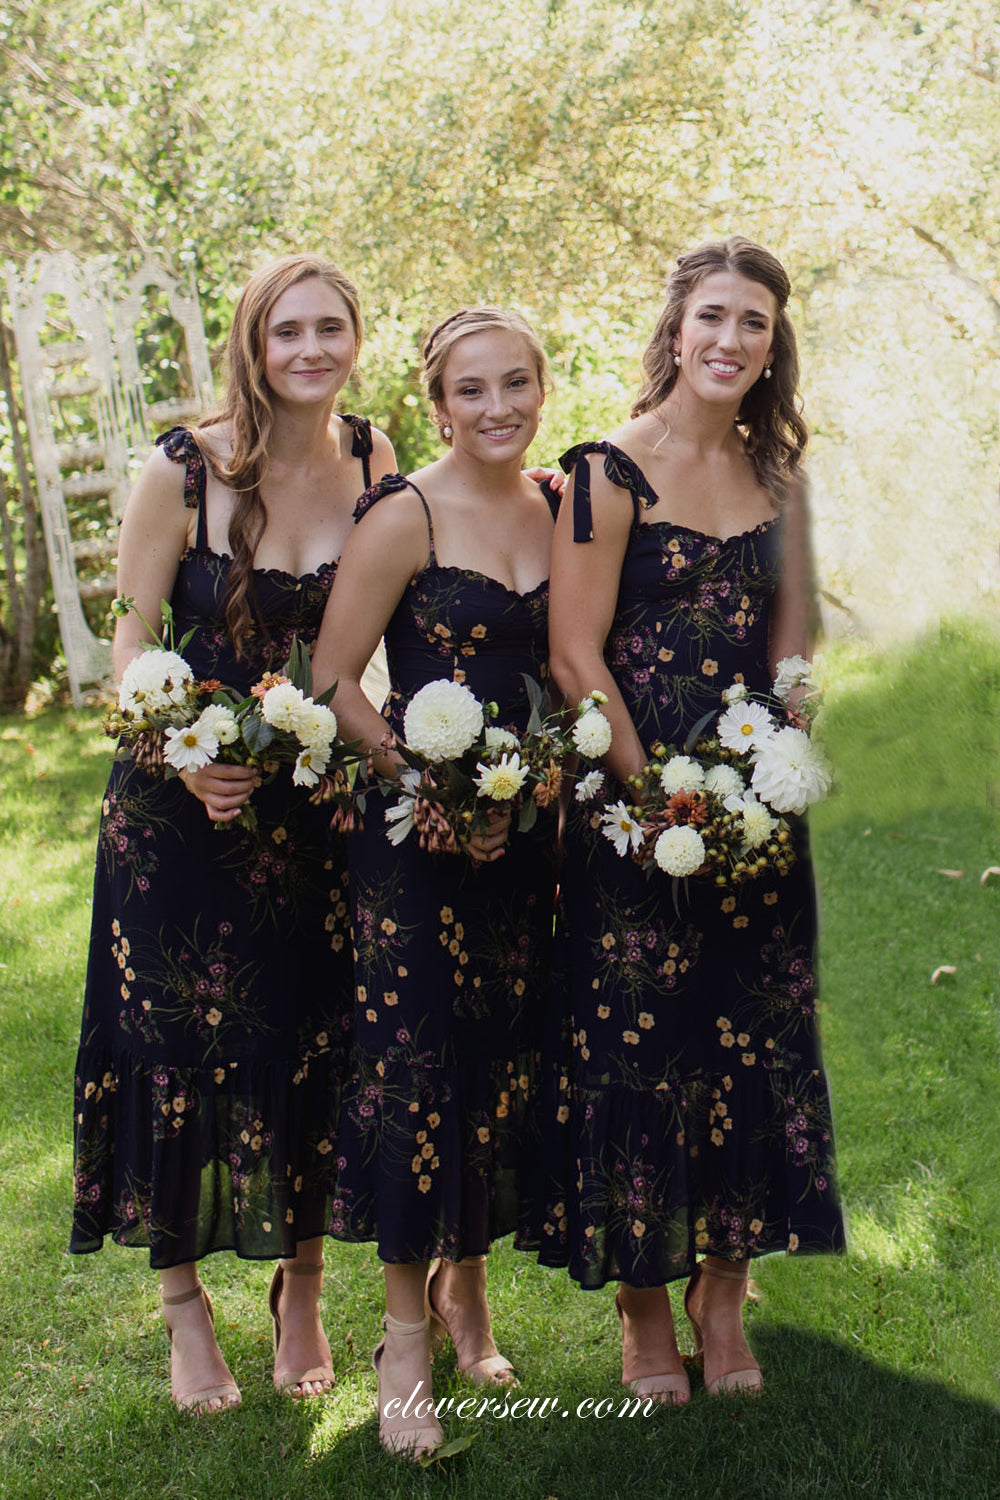 Share more than 197 black bridesmaid gown